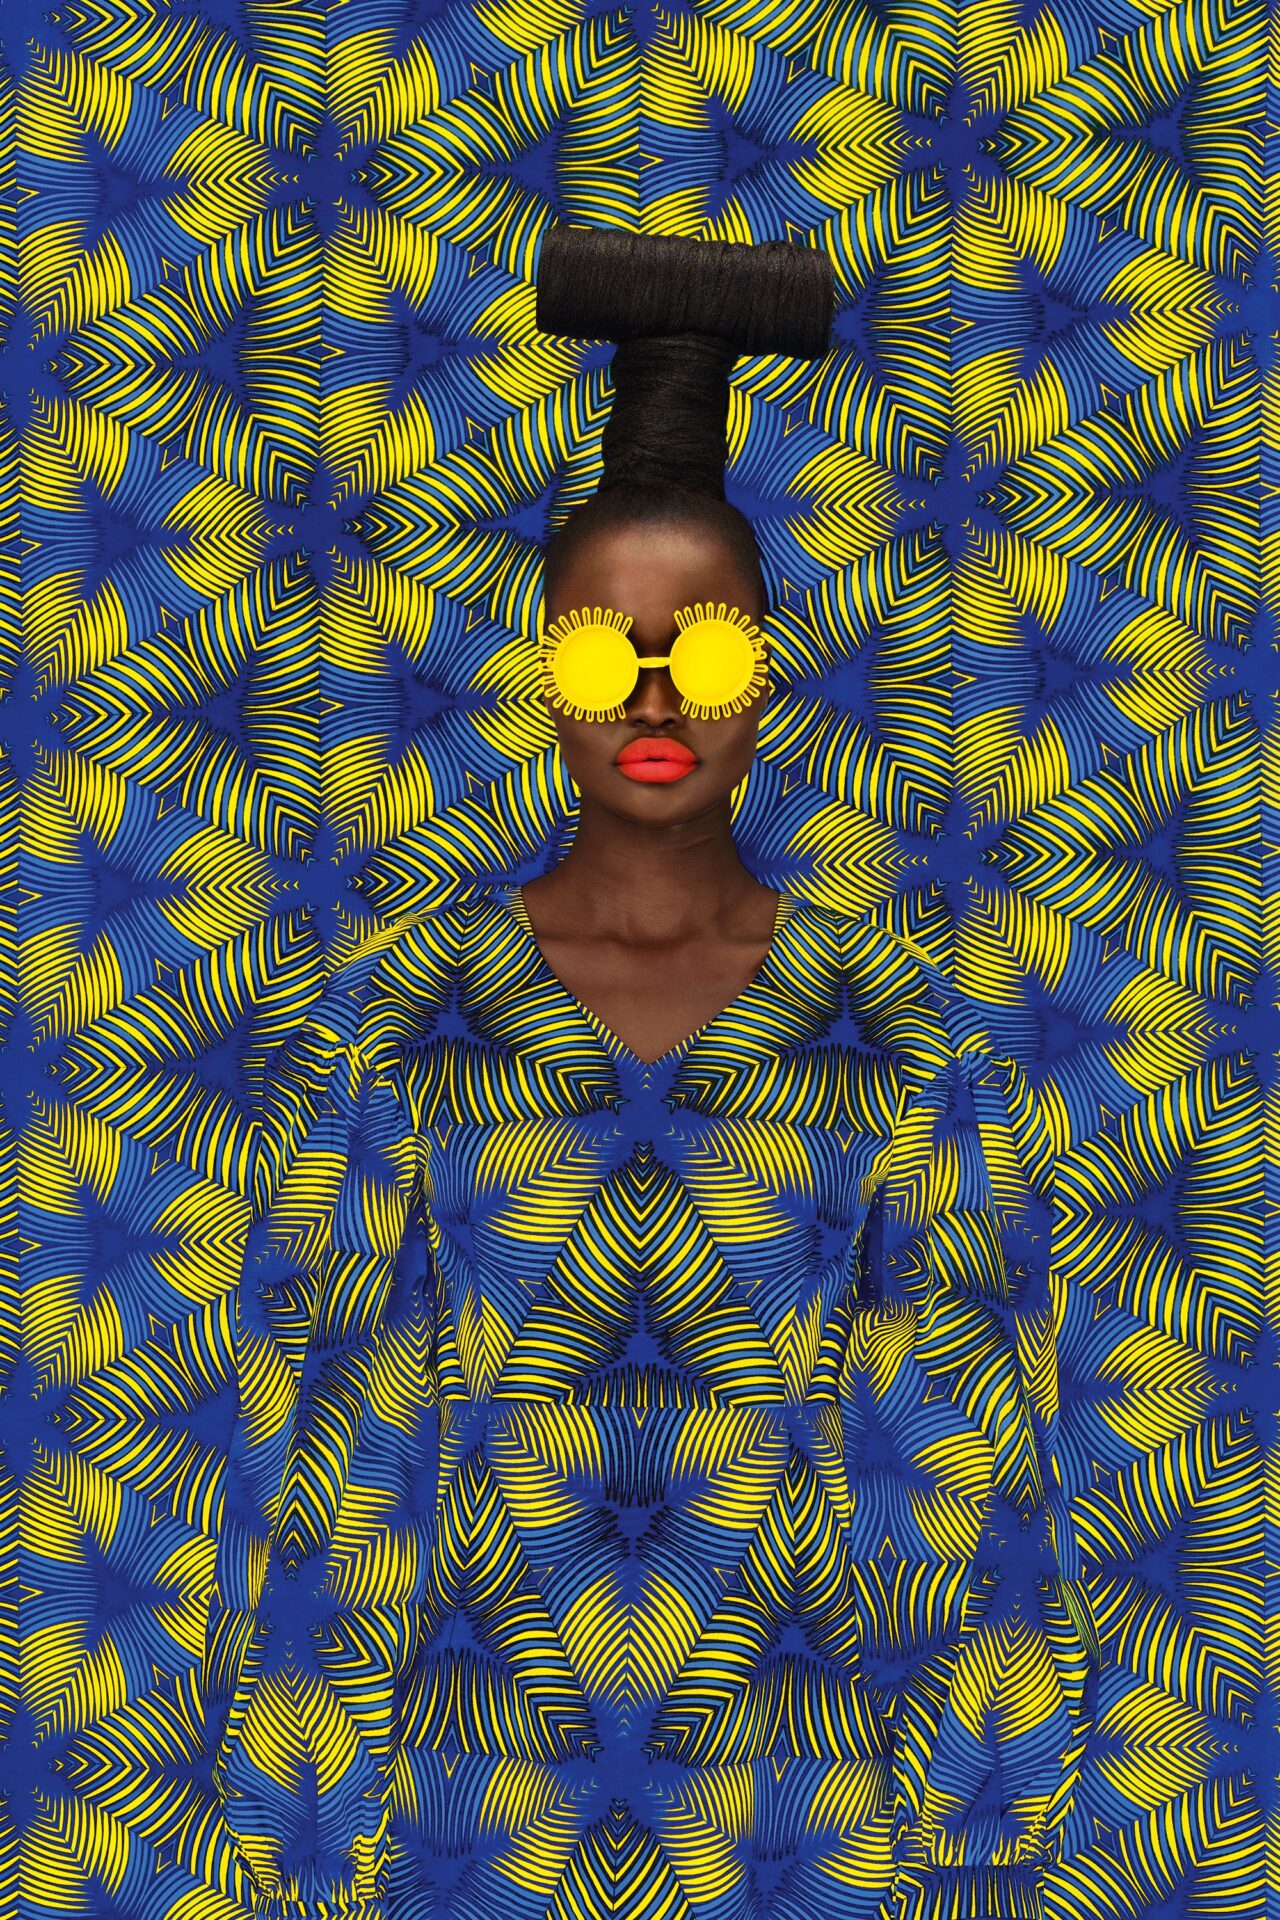 a portrait of the artist against a patterned yellow and blue backdrop. she's wearing bright yellow eyewear